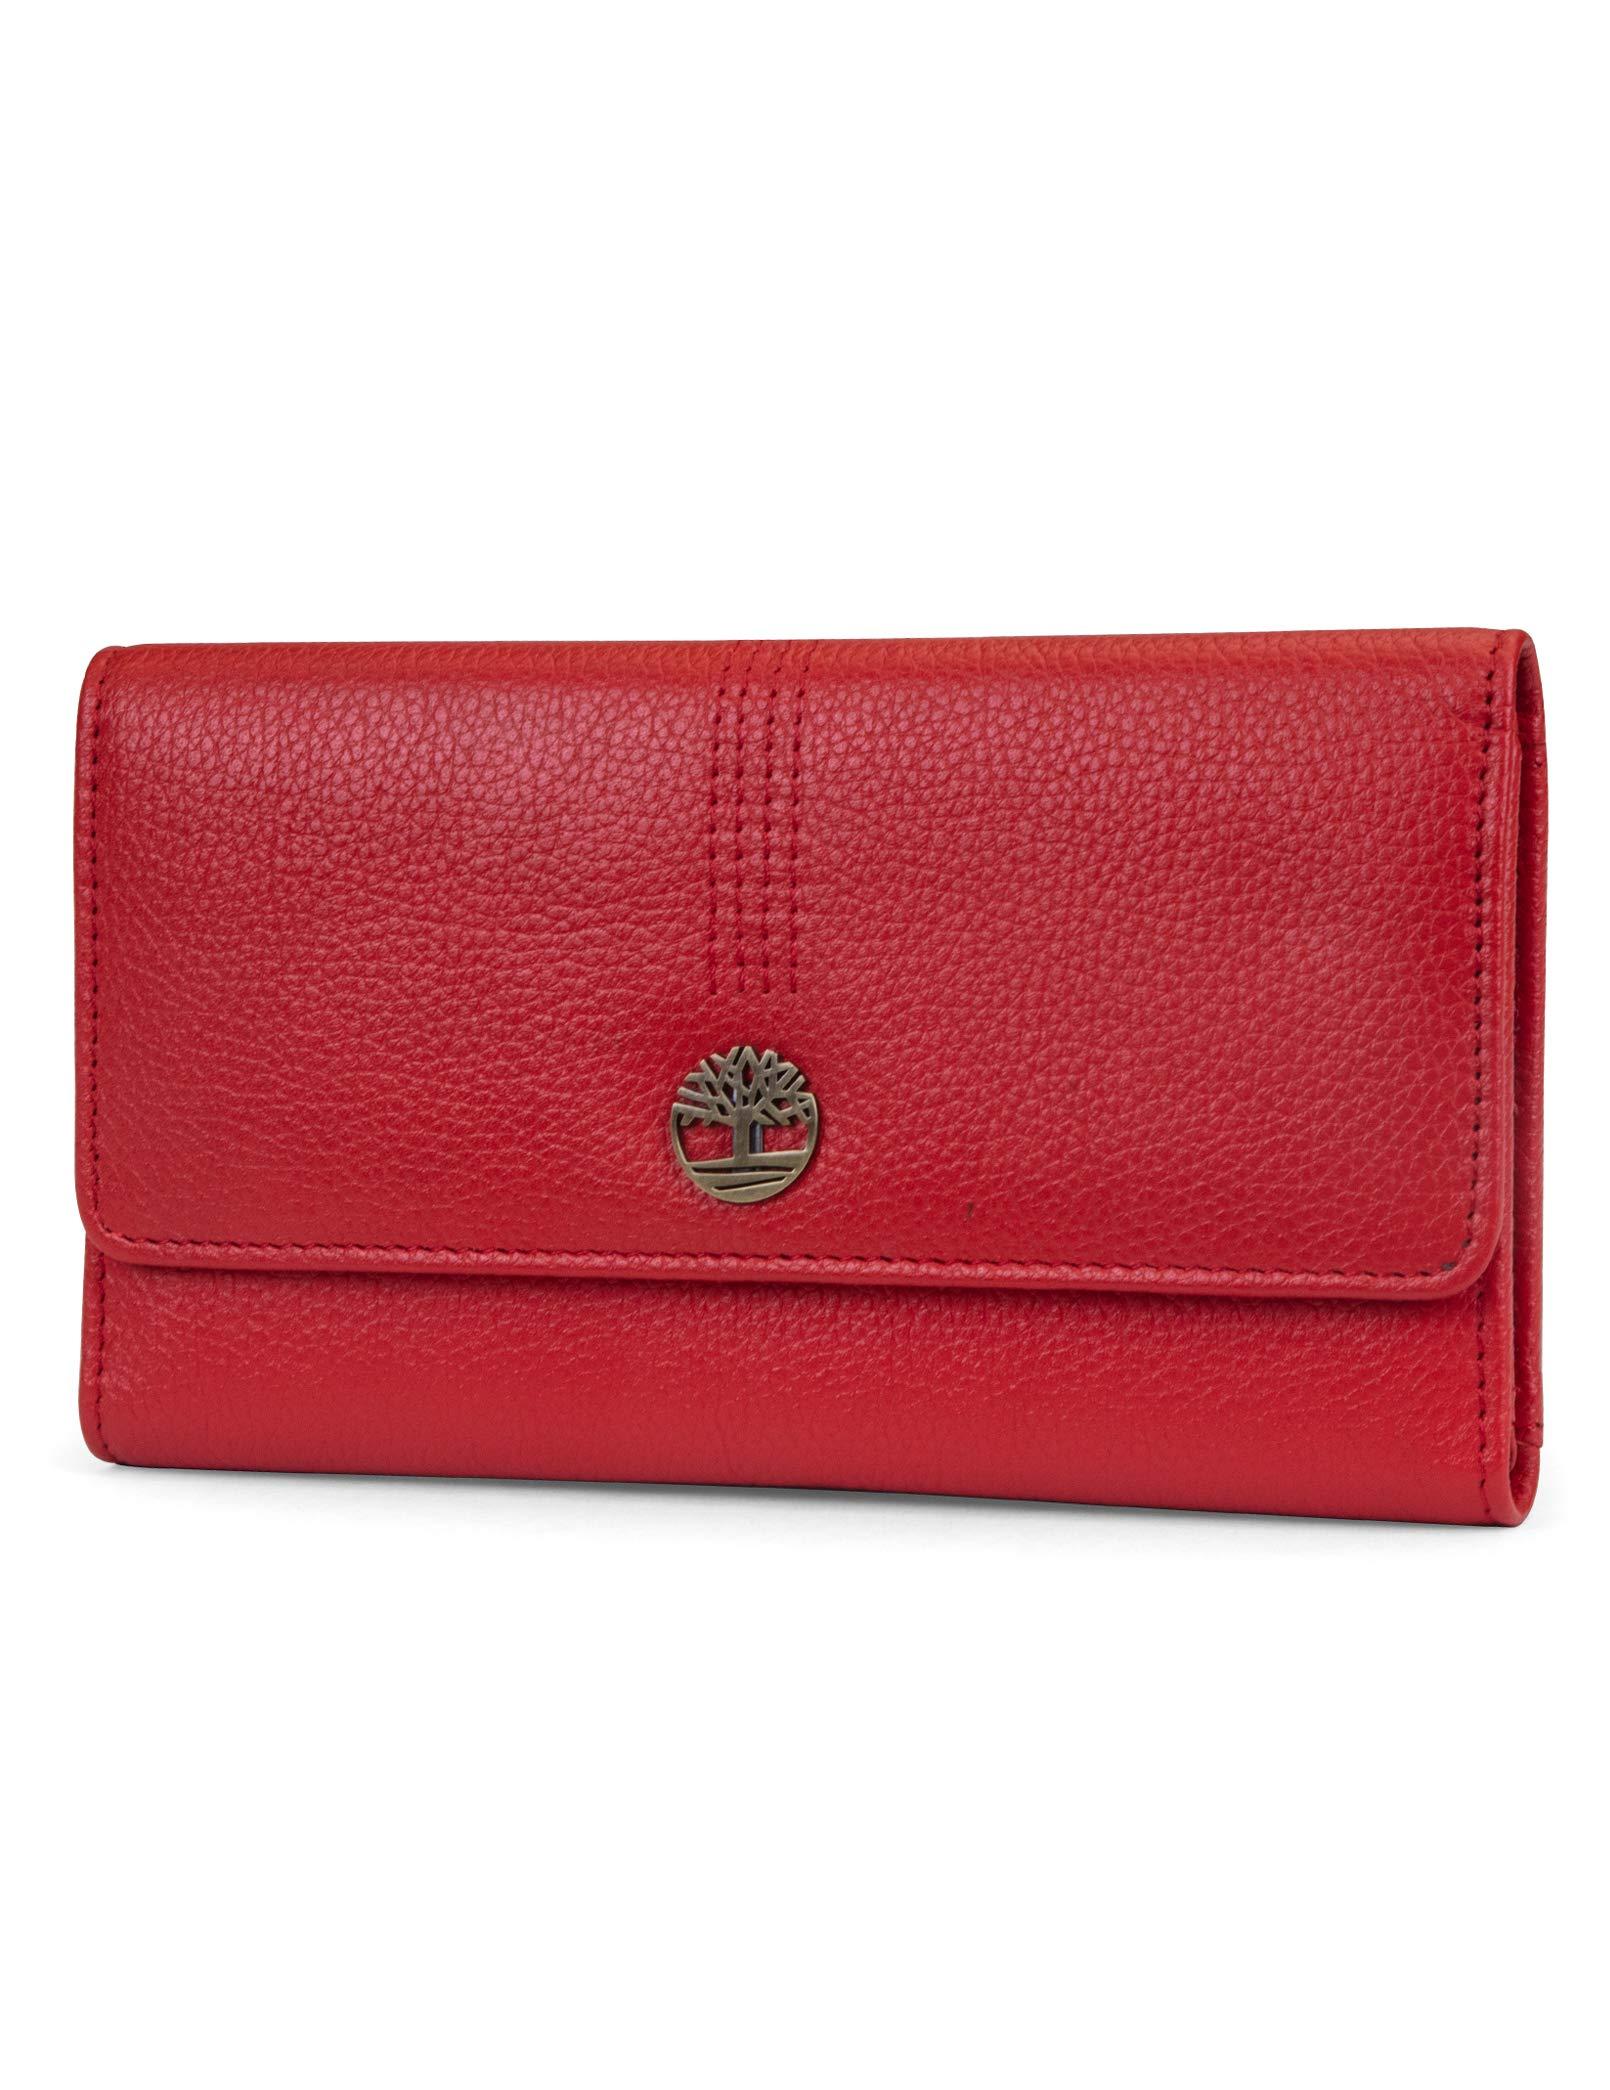 Timberland Leather Rfid Flap Wallet Cluth Organizer in Red | Lyst